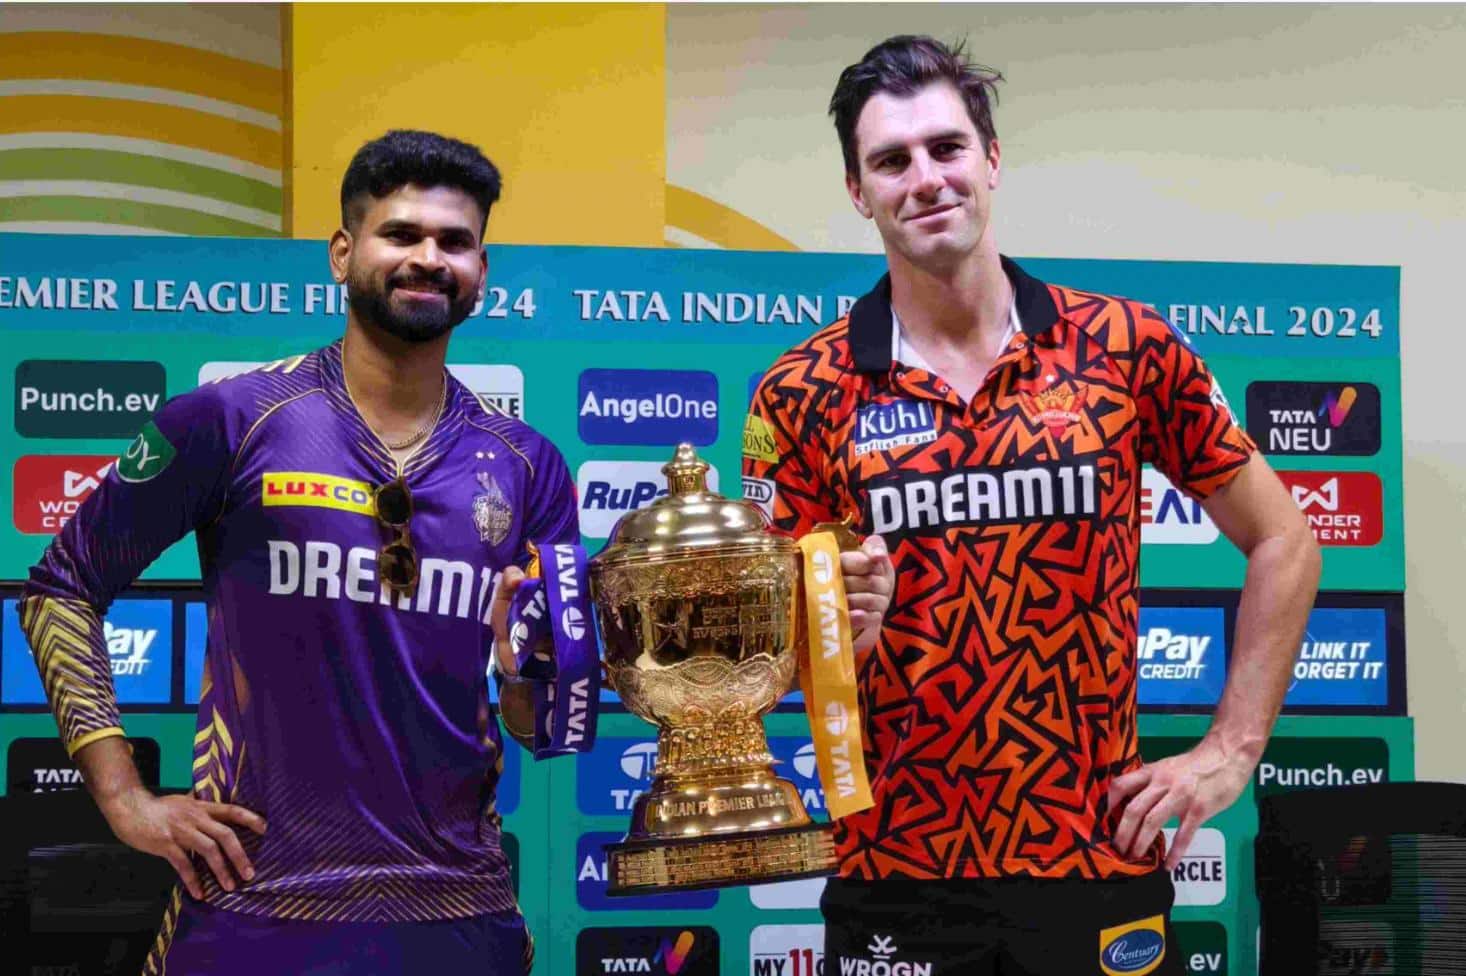 Cummins Spotted Posing Right Side To Trophy! Does This Confirm His IPL Title Win?